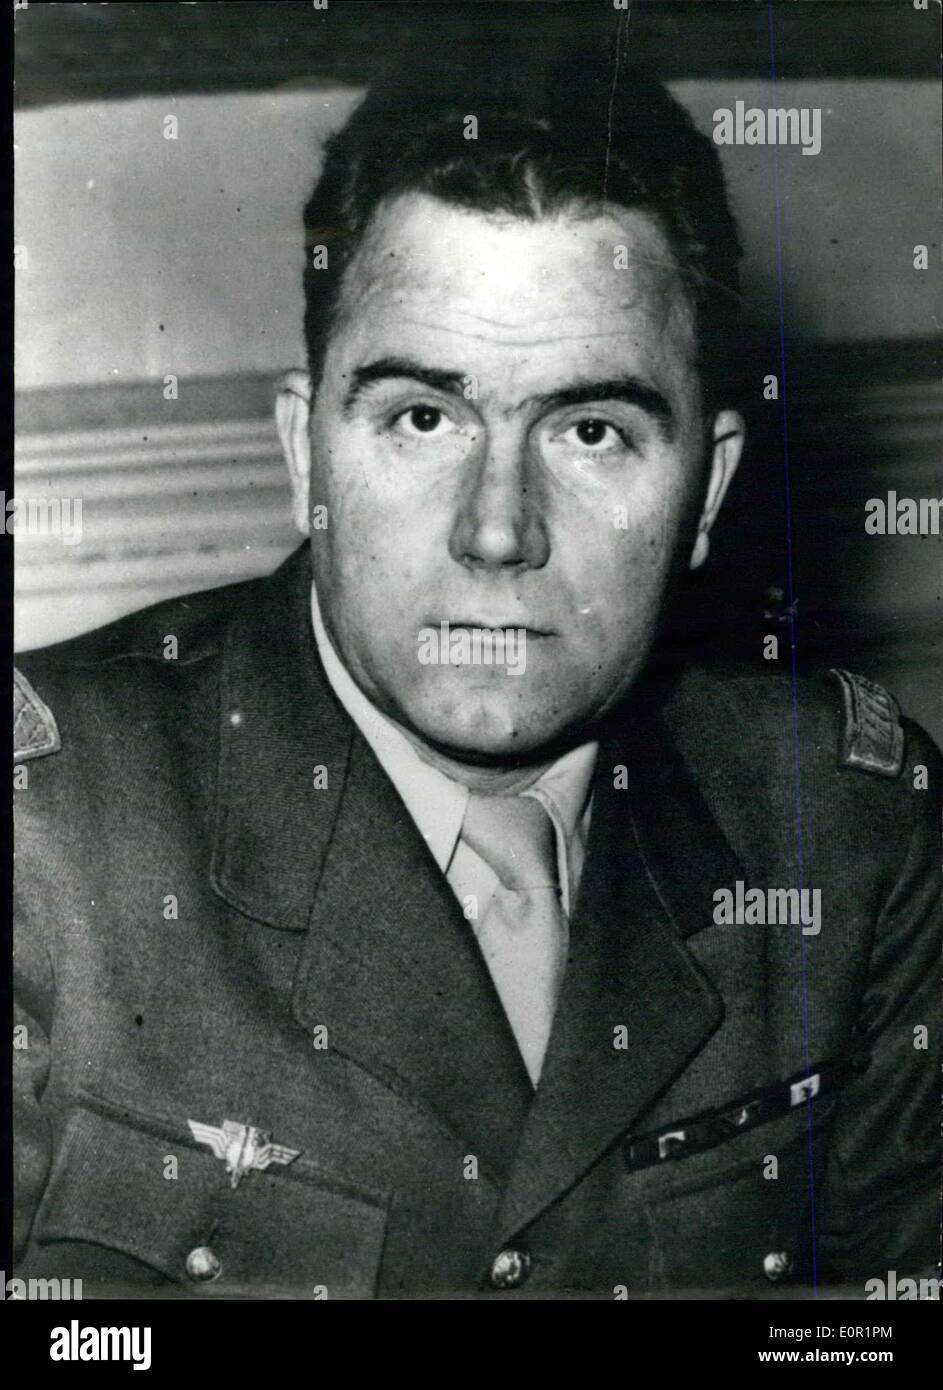 Sep. 16, 1957 - Chief Of 'Spy Hunt': Genera Grossin, 56, one of the Chief Organisers of the resistance movement in Northern Africa during the World War, has been appointed chief if the French counter Espionage (French Equivalent of the intelligence service) succeeding Pierre Boursicaut. Photo shows A recent Portrait of general Grossin. Stock Photo